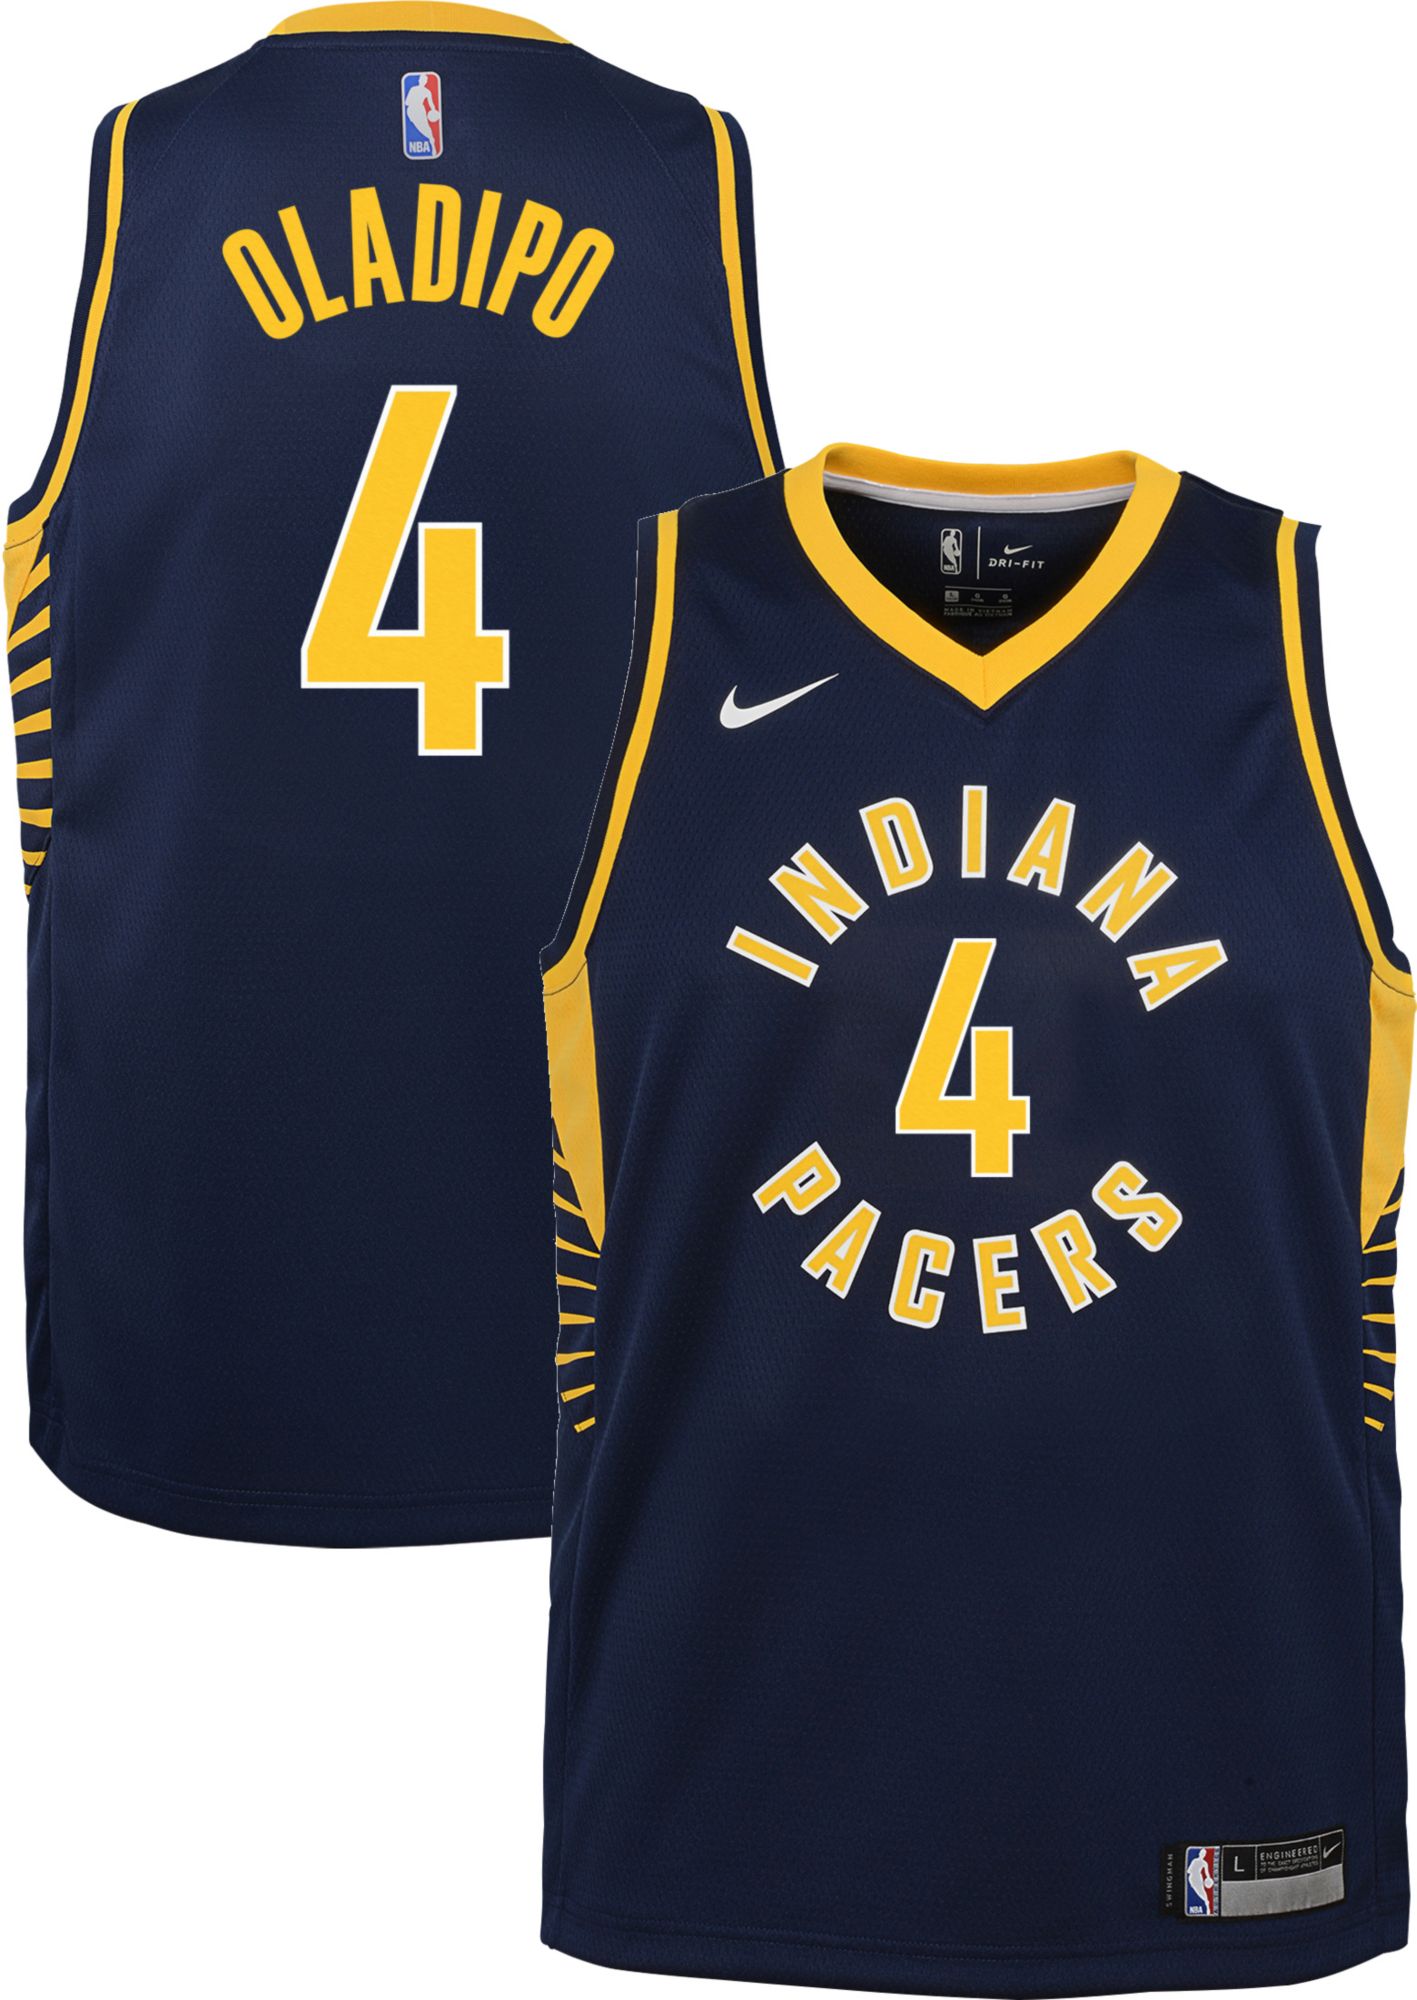 victor oladipo jersey youth